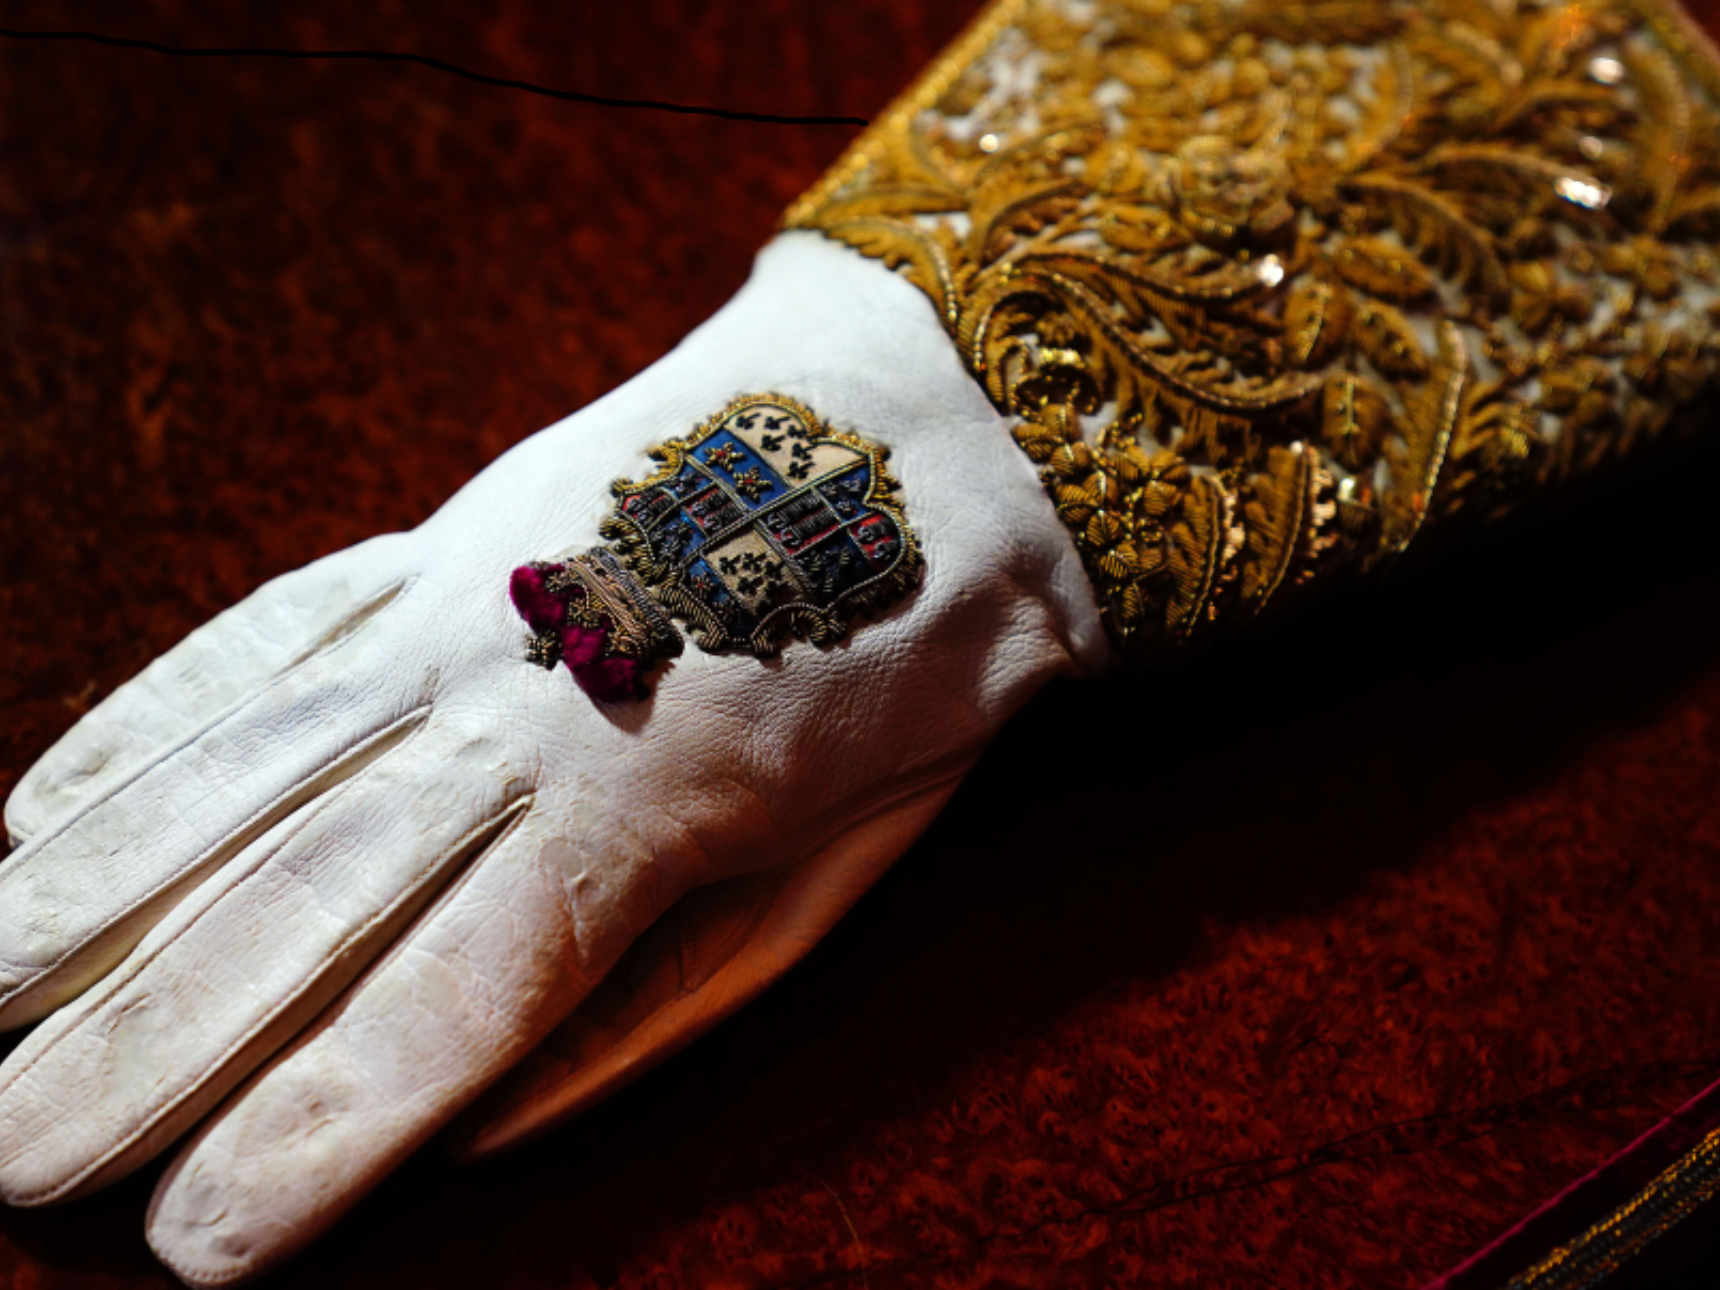 The Coronation glove worn by King Charles III on May 6th, 2023 was made by Dent Glovemakers for his grandfather, King George VI.